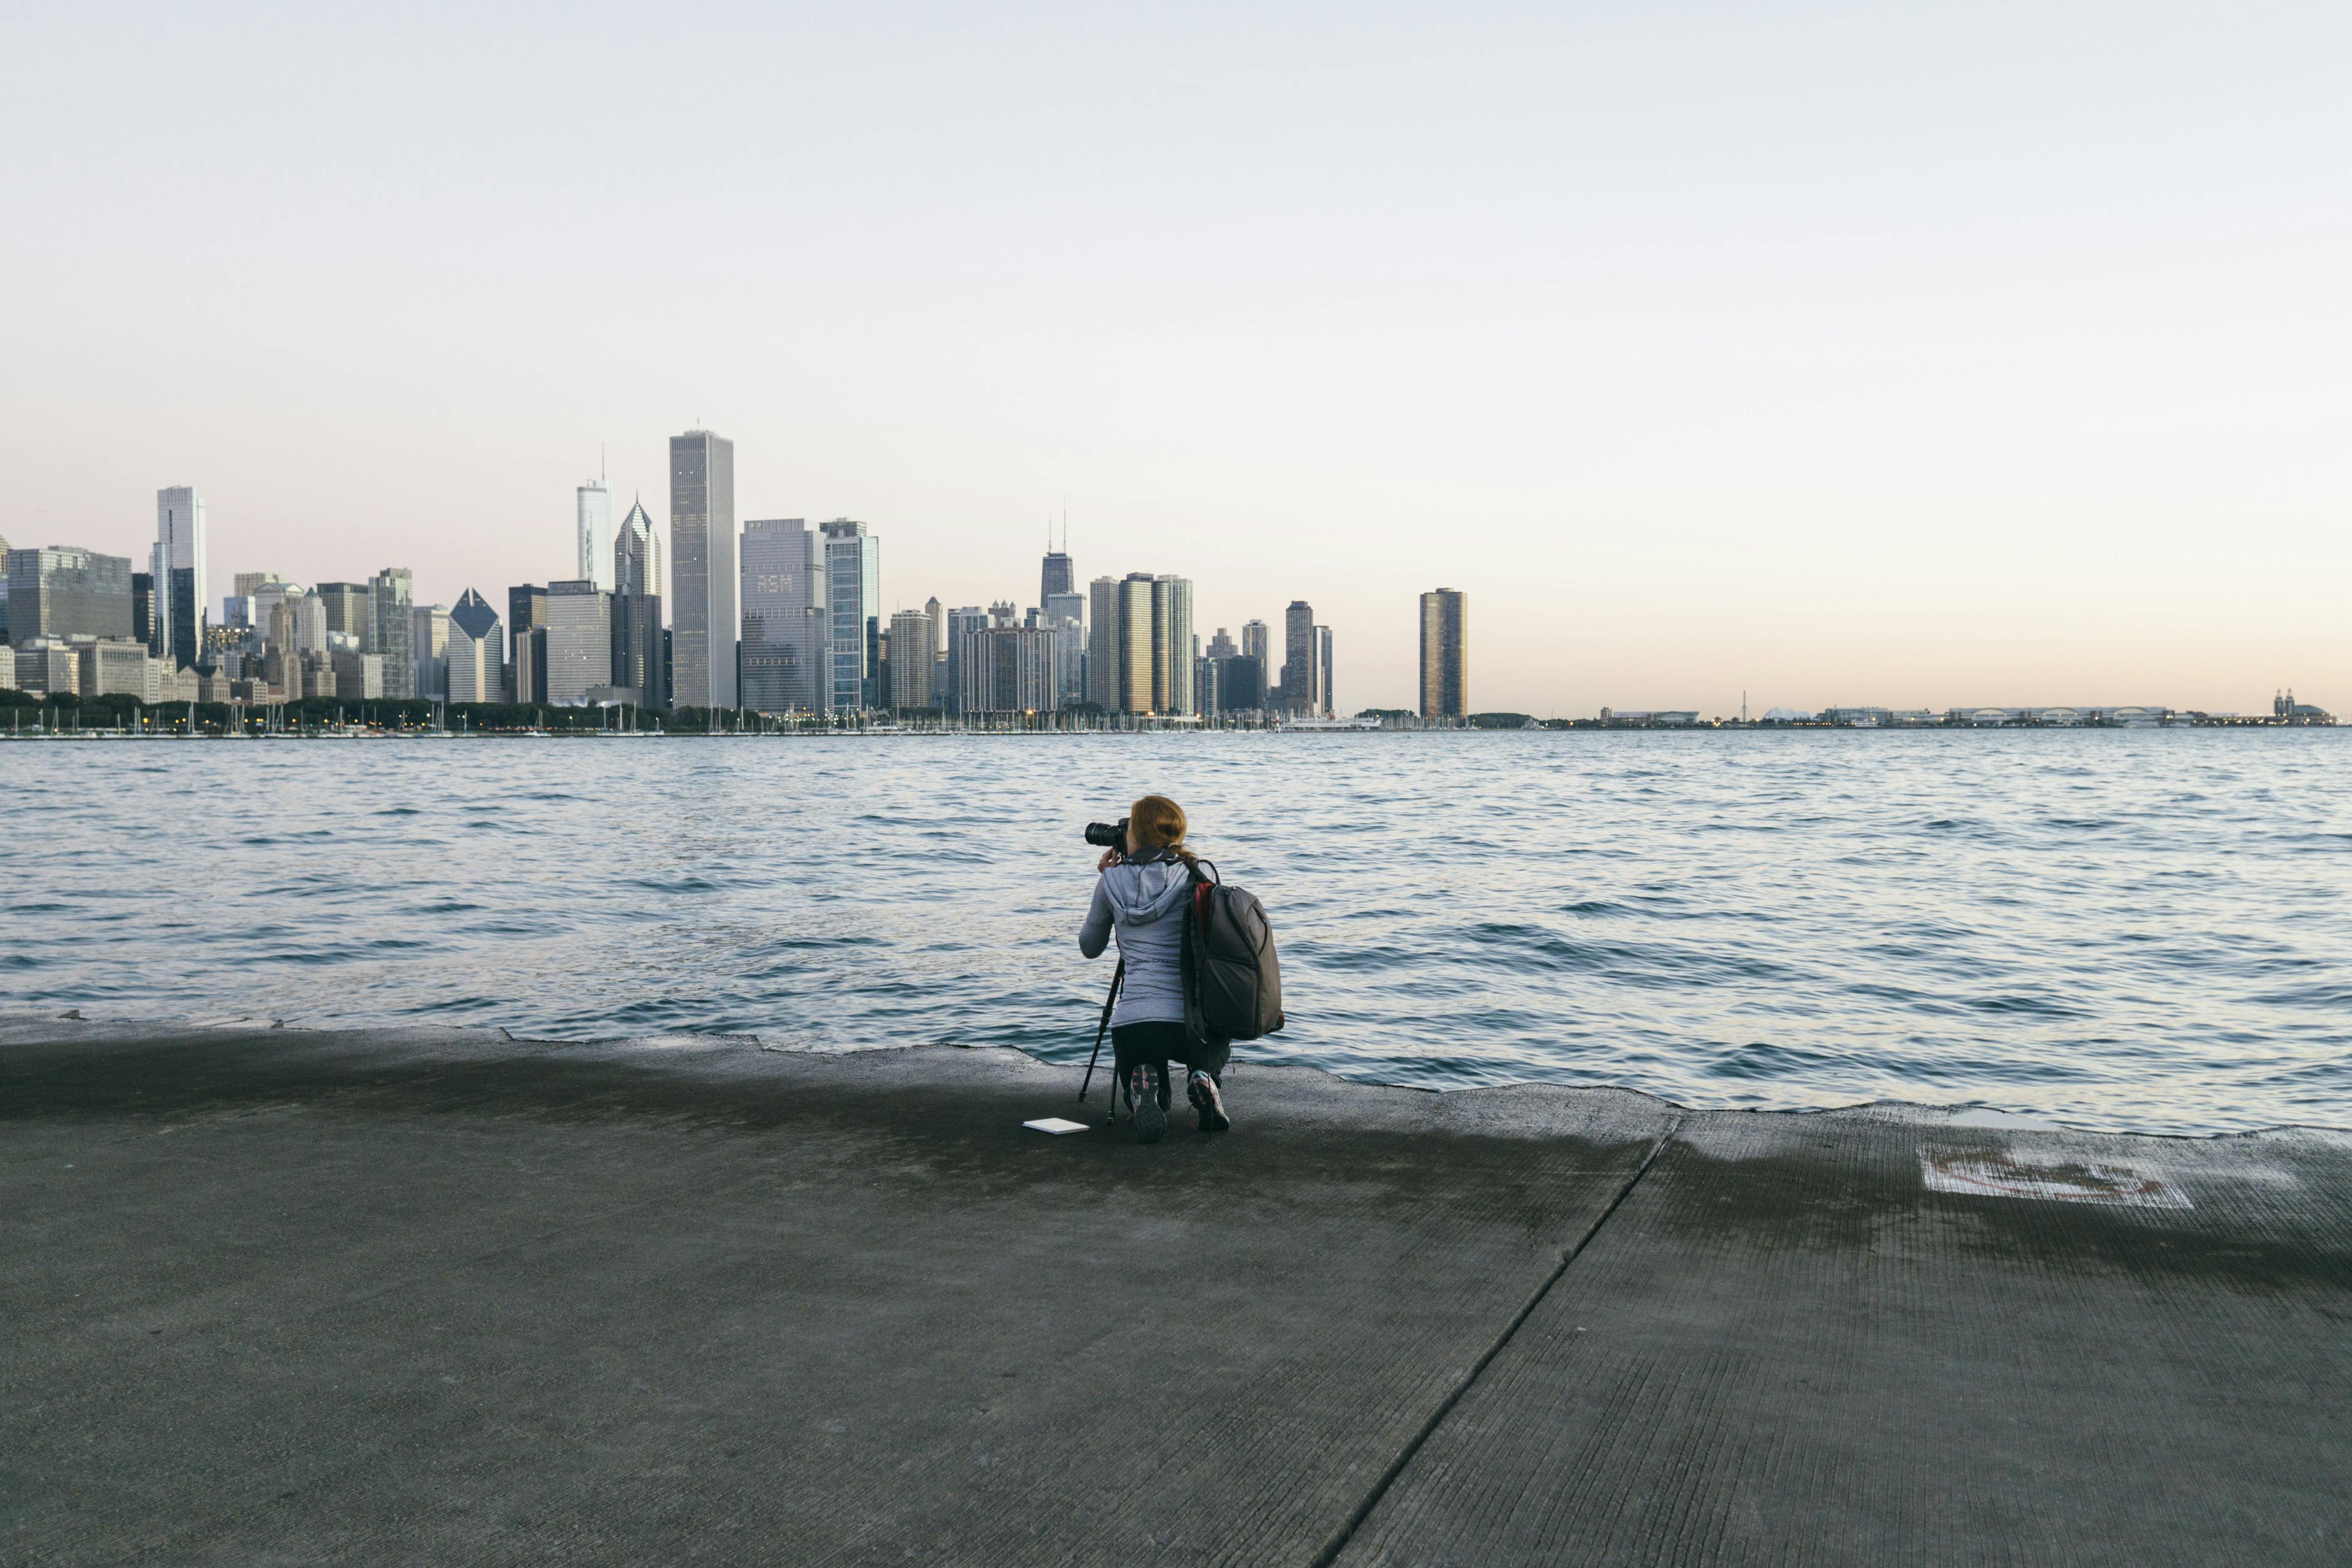 A woman crouches near a body of water at sunrise to take a photograph of a city in the distance.